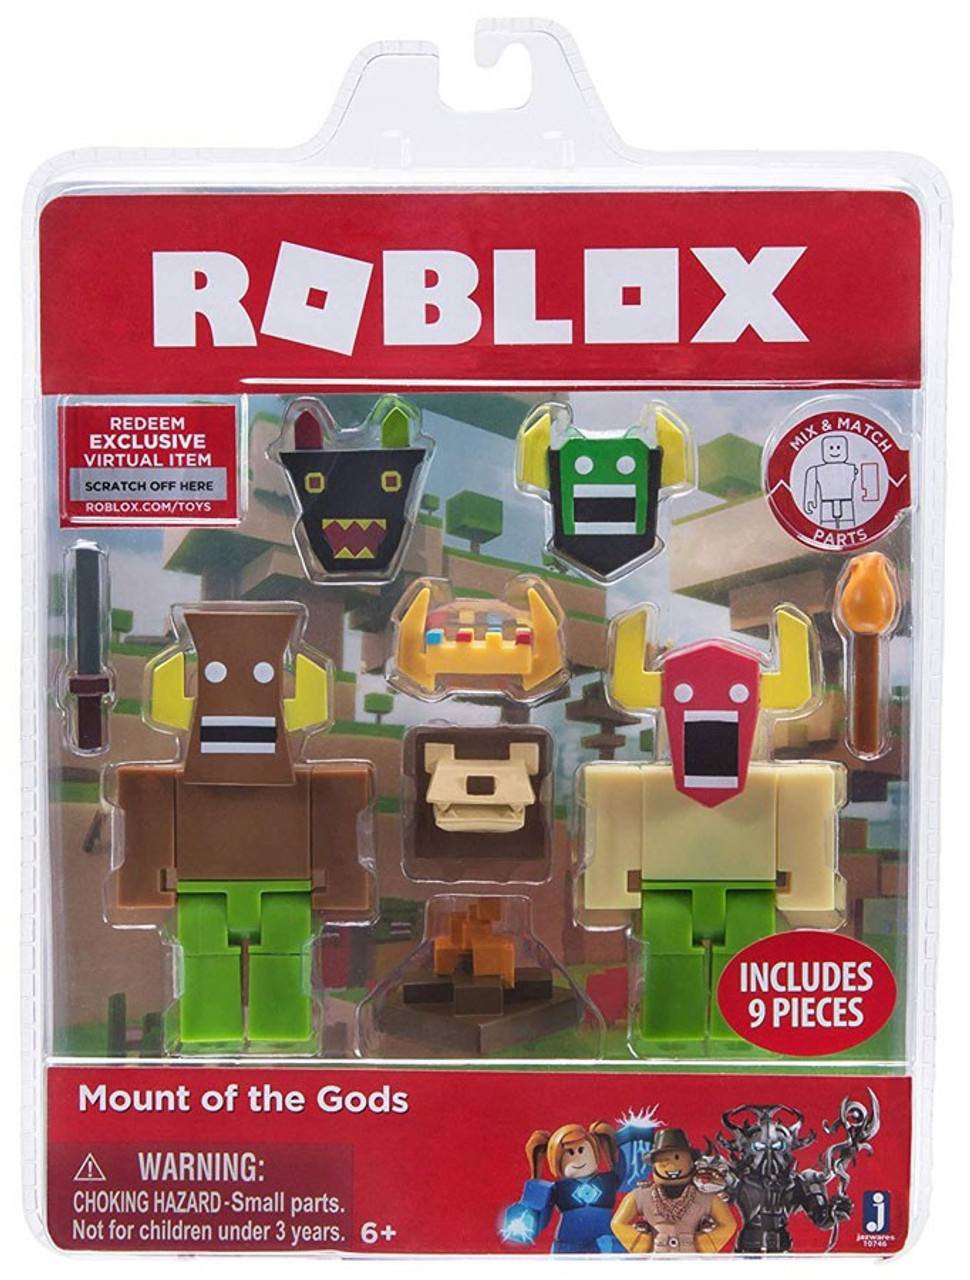 Roblox Operation Tnt Large Playset Characters Accessories W Virtual Code Tv Action Figures Tv Movie Video Game Action Figures - operation tnt roblox toy